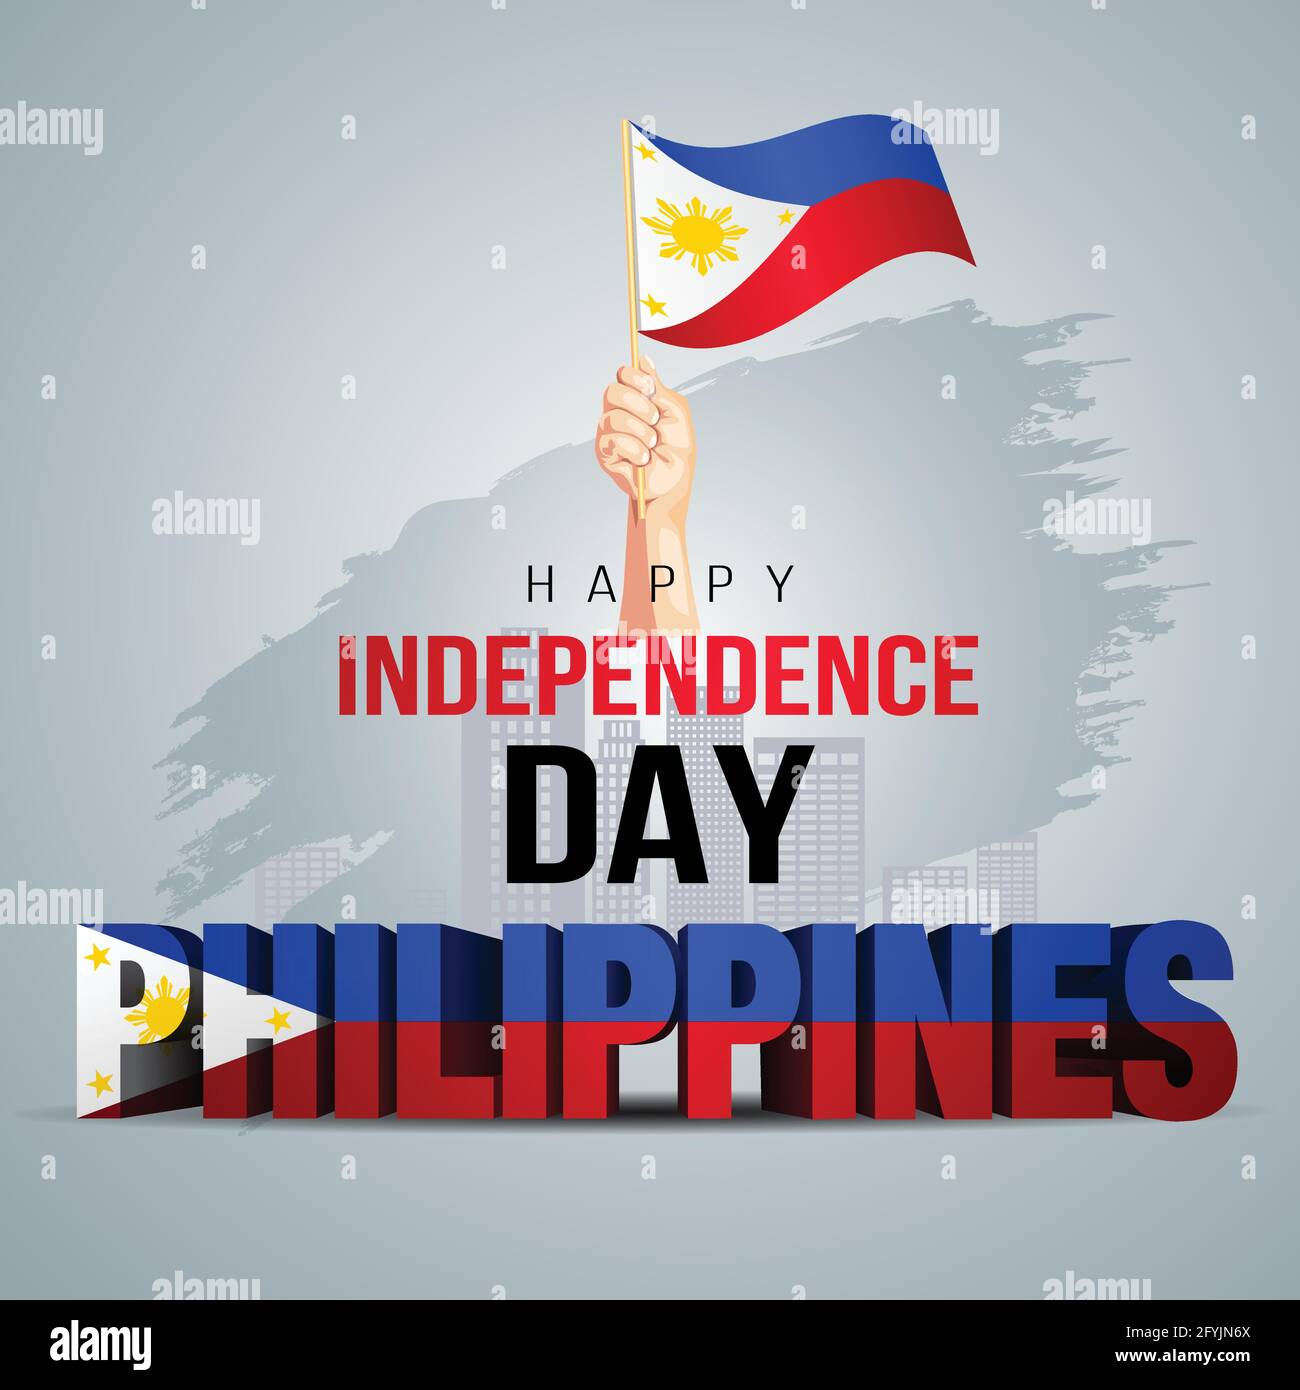 Happy Independence Day Philippine Vector Template Design ...